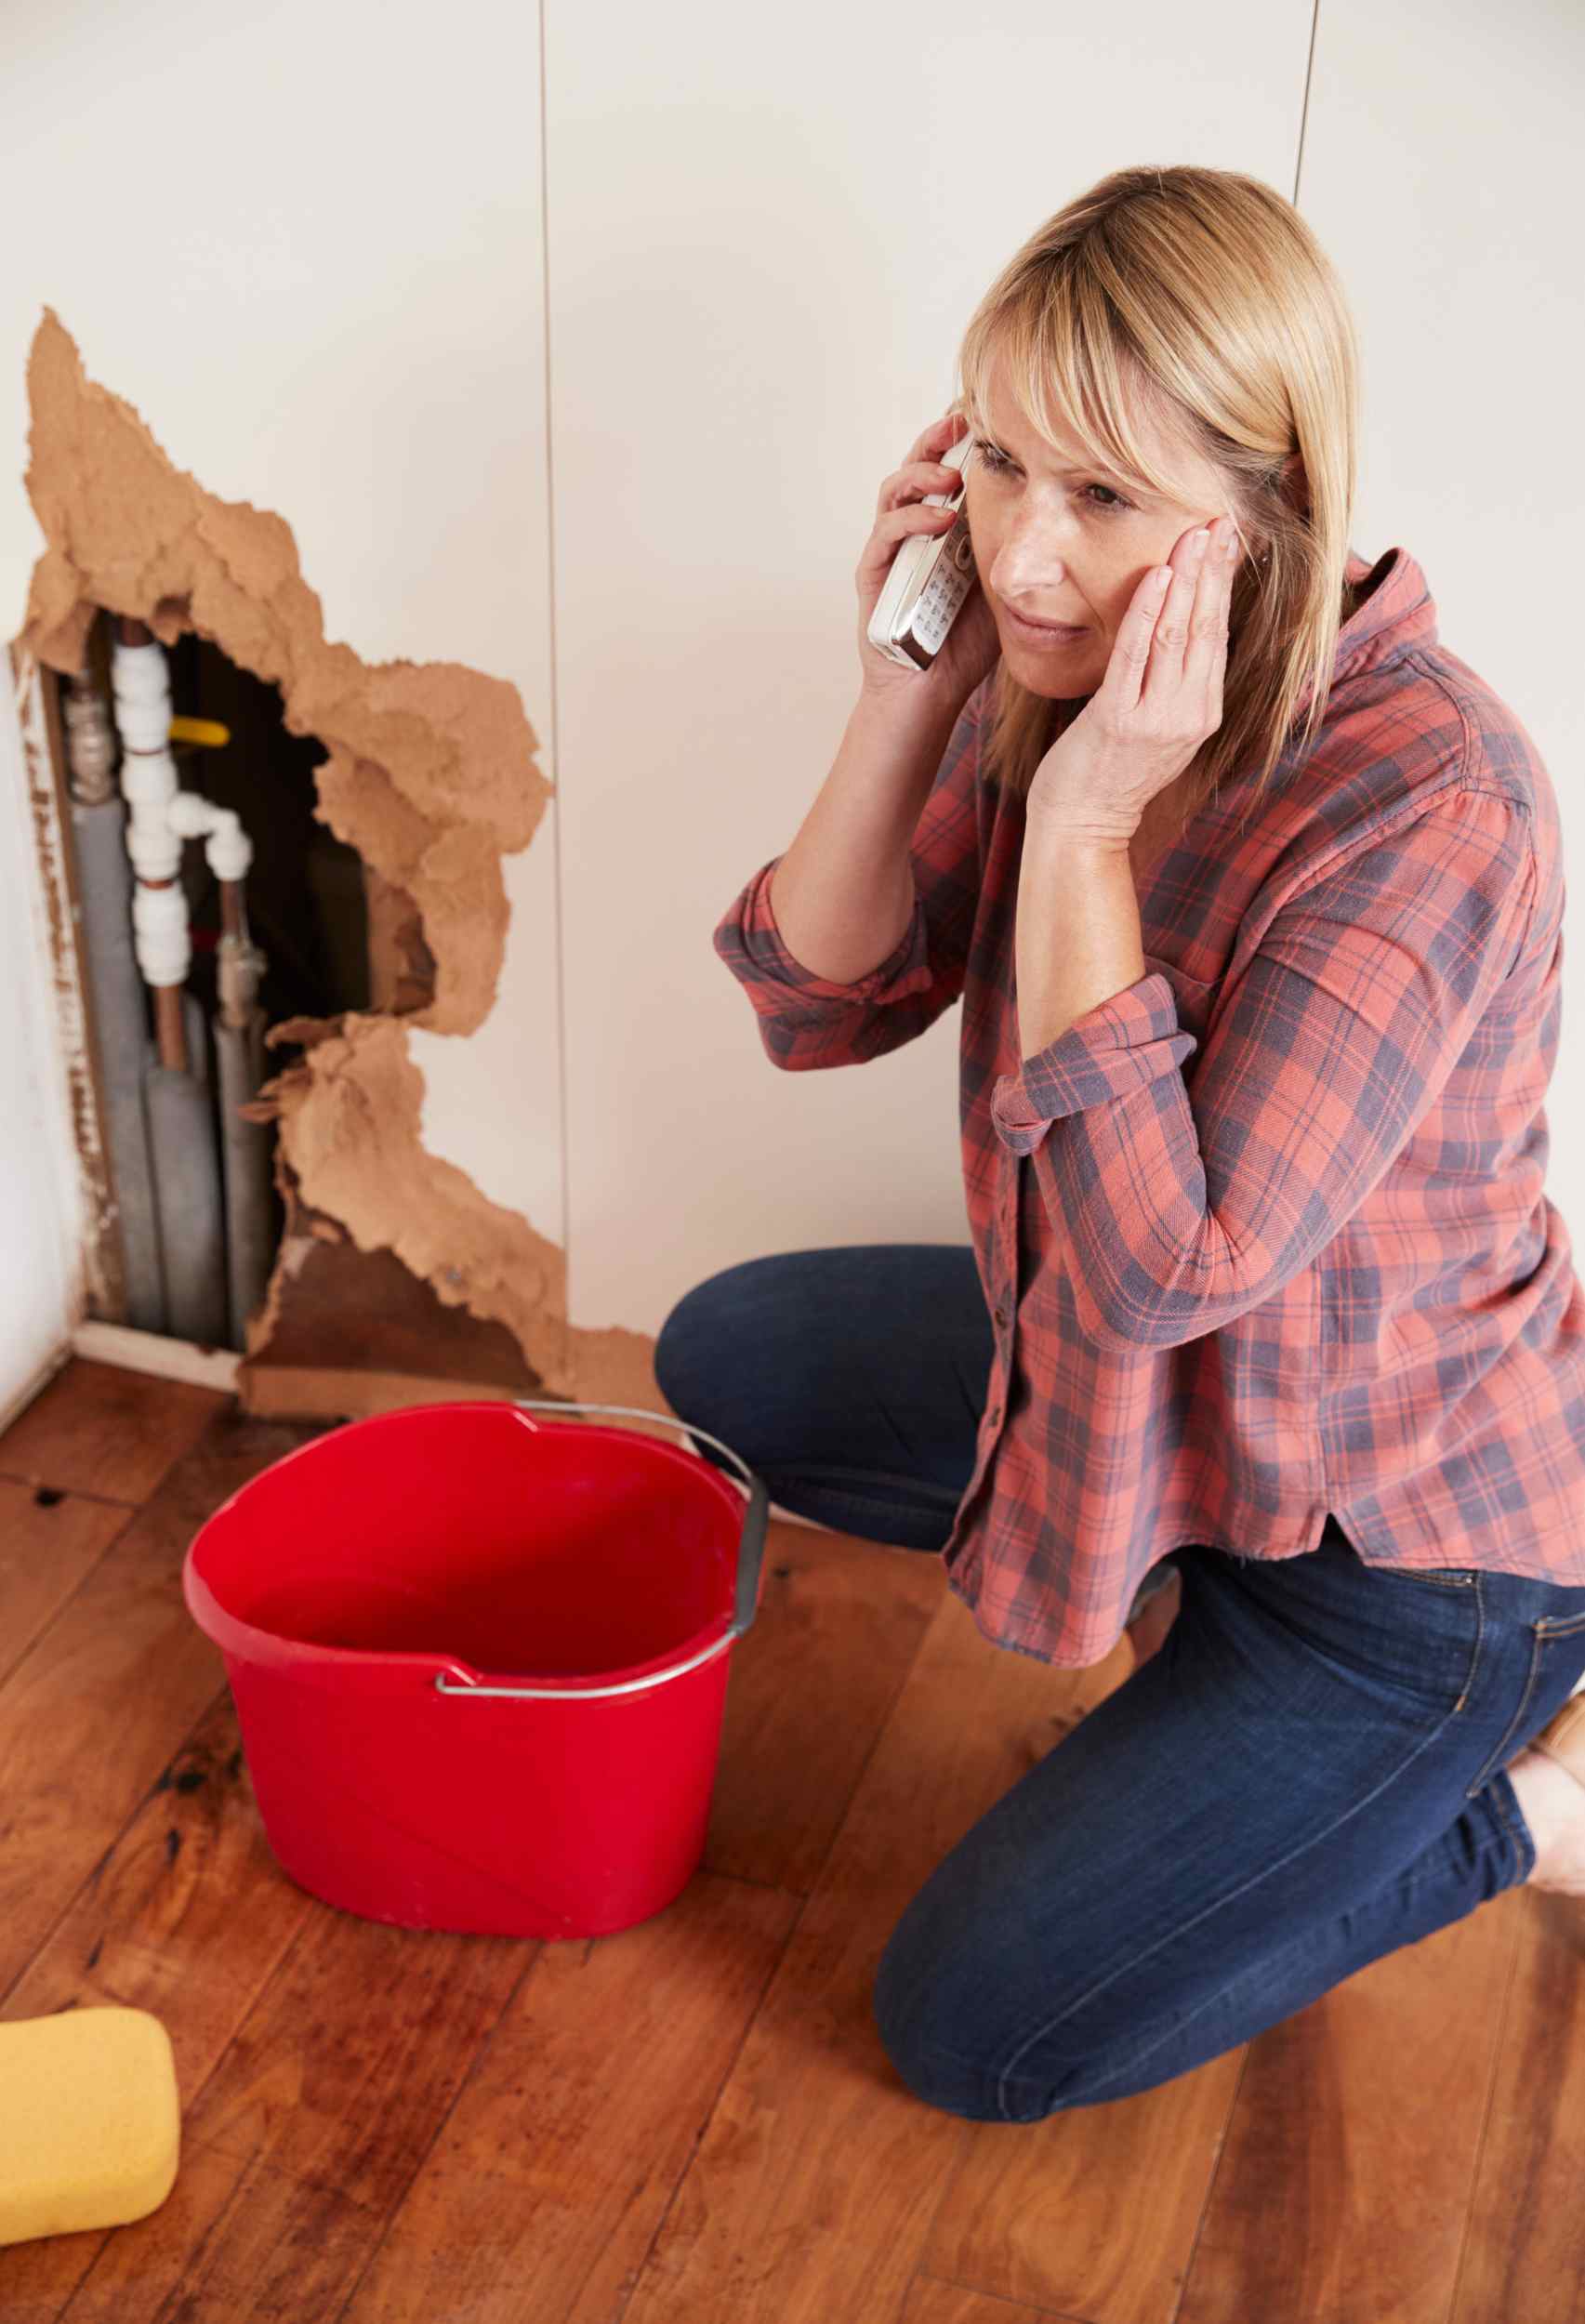 Why Burst Pipes Are A Real Home Emergency